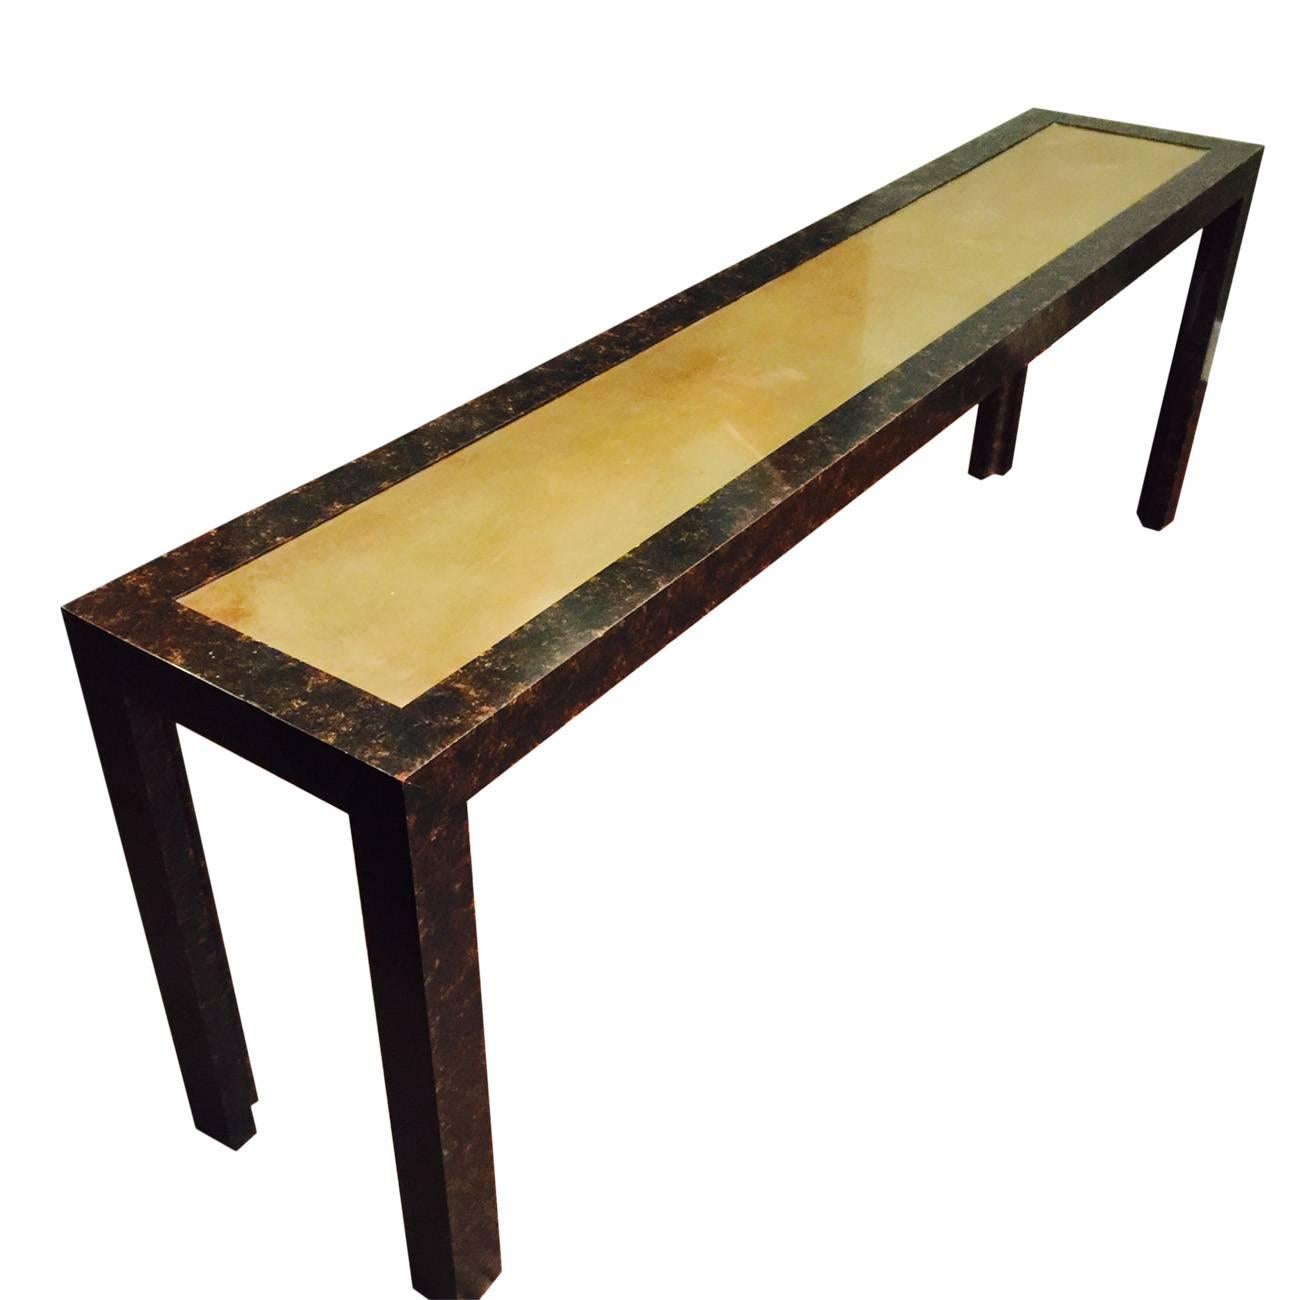 A John Widdicomb long wood console with an antiqued brass top and painted faux tortoise detailing, 70